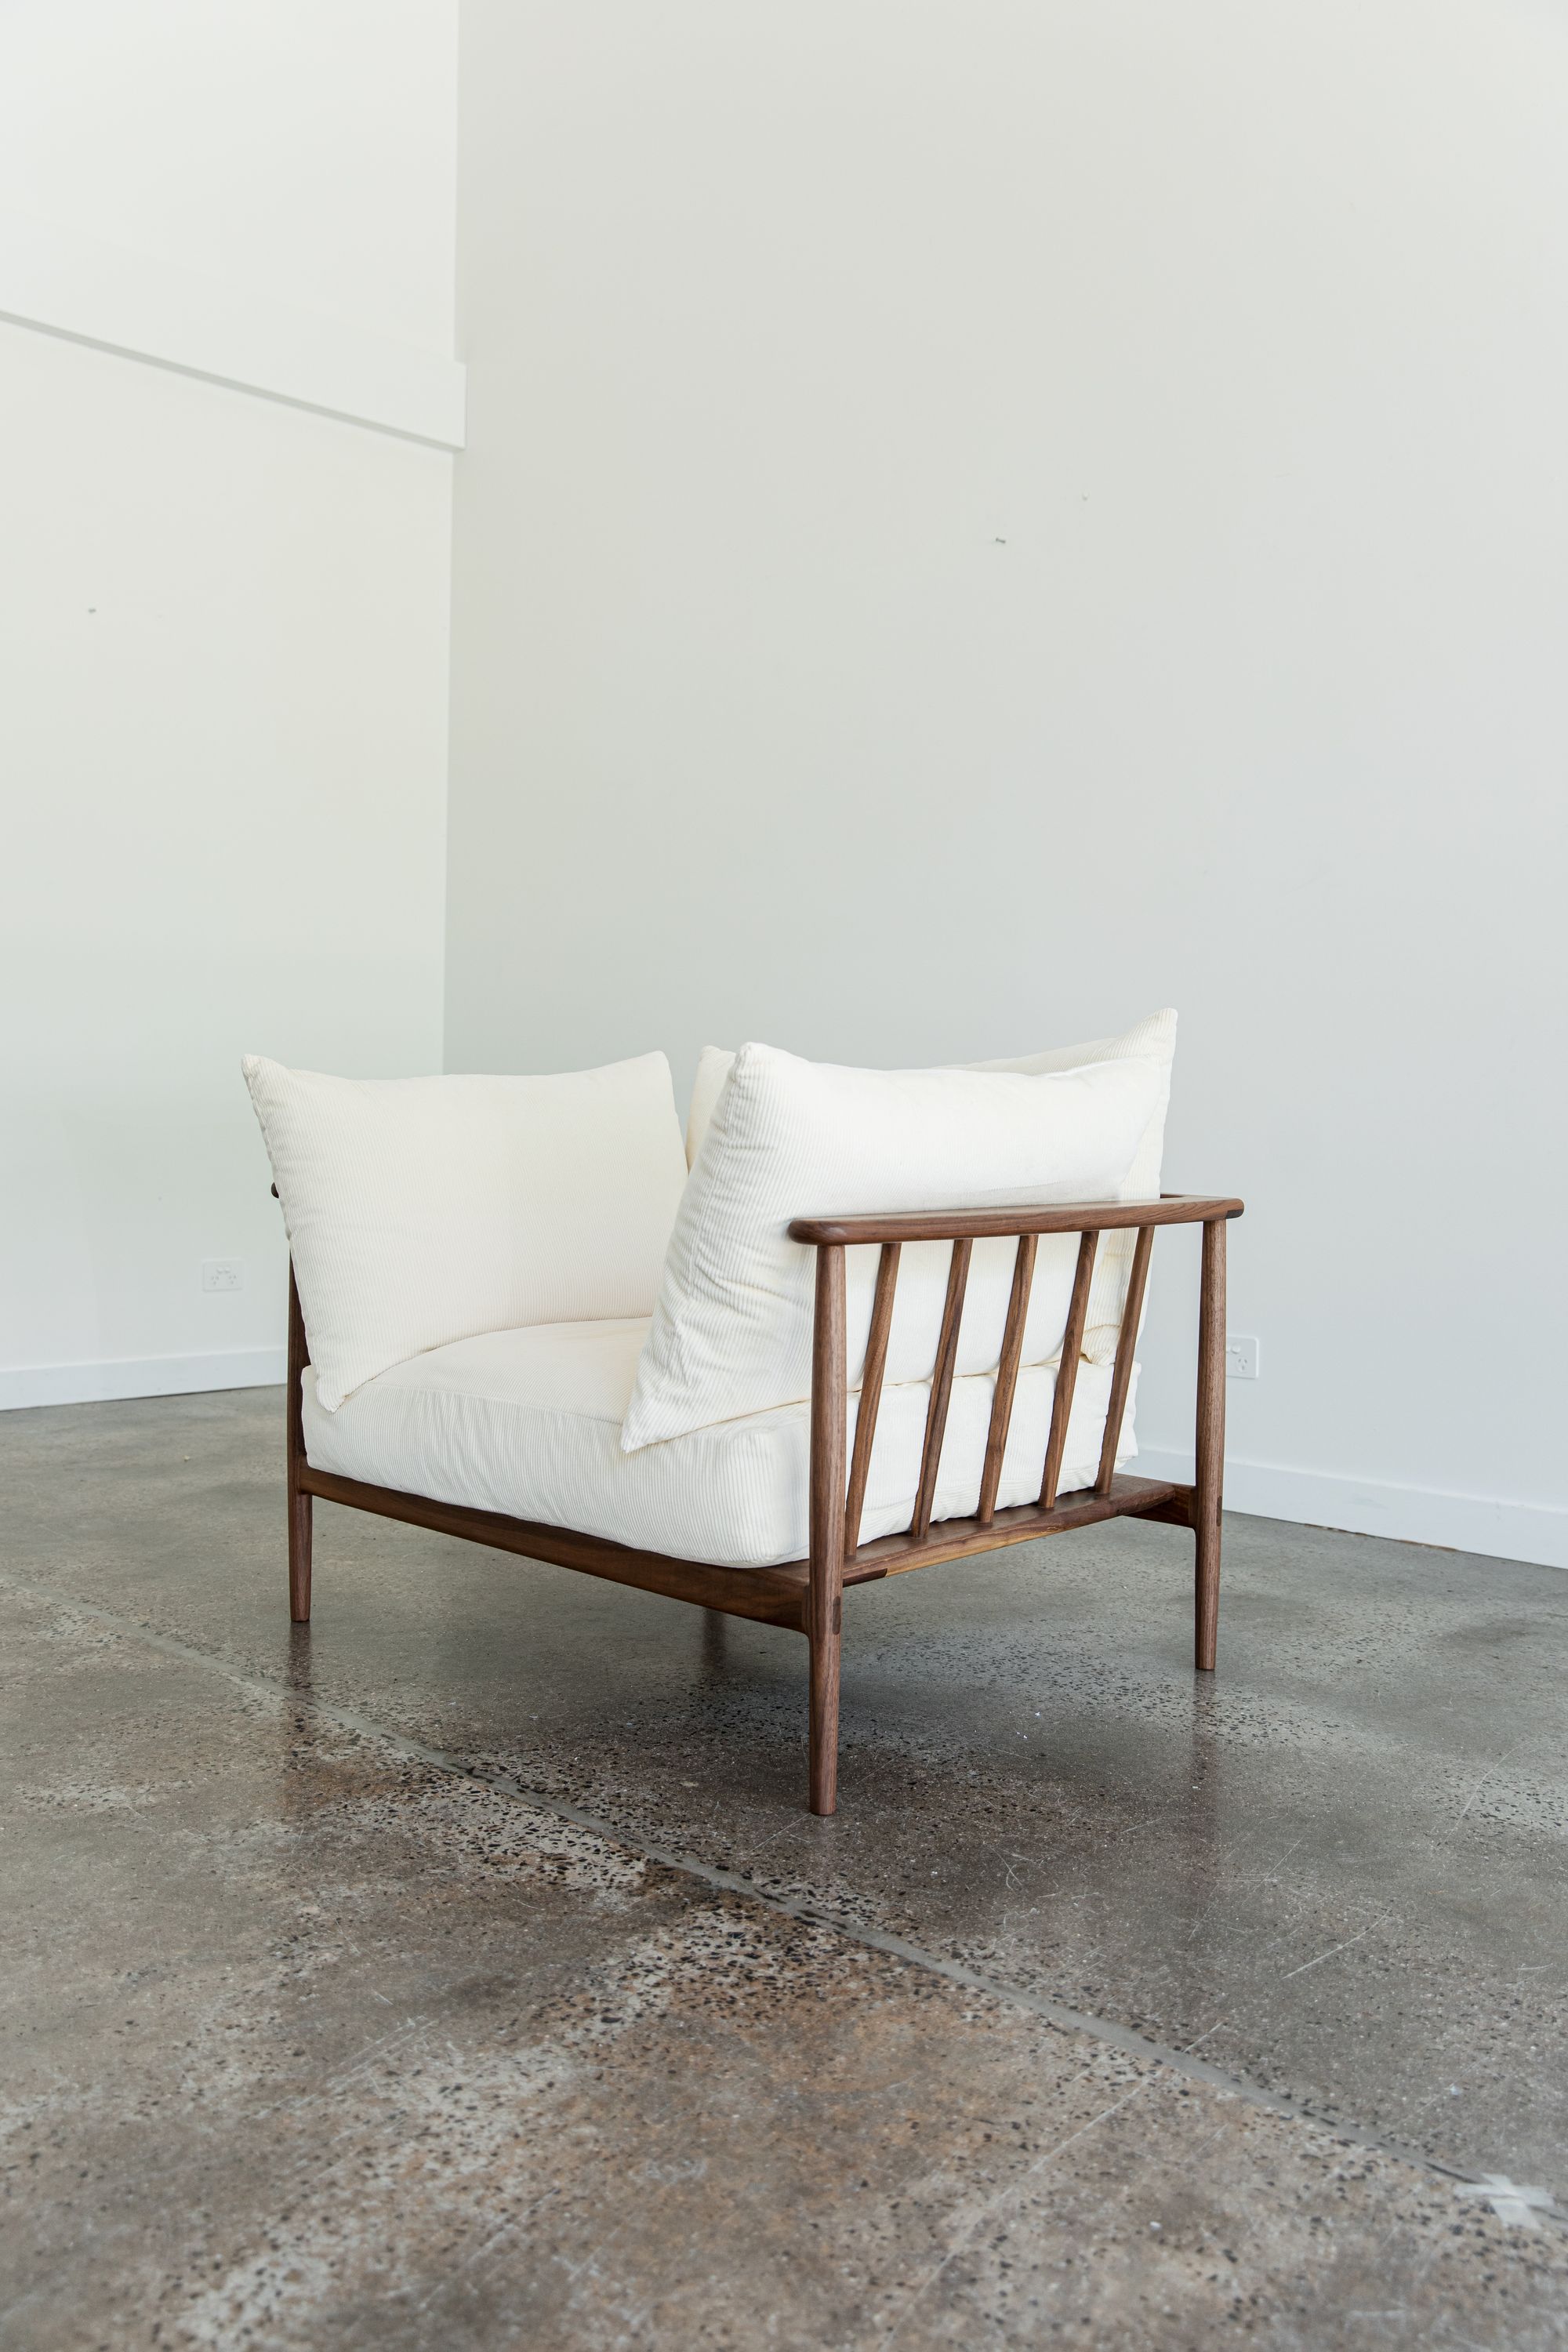 J.D Lee Furniture.A contemporary wooden lounge chair with a minimalist design sits gracefully against a backdrop of white walls. The chair features a deep seat cushioned with soft white pillows, providing a stark contrast to its rich brown frame. Its backrest consists of evenly spaced wooden slats, adding an element of geometric visual interest. 